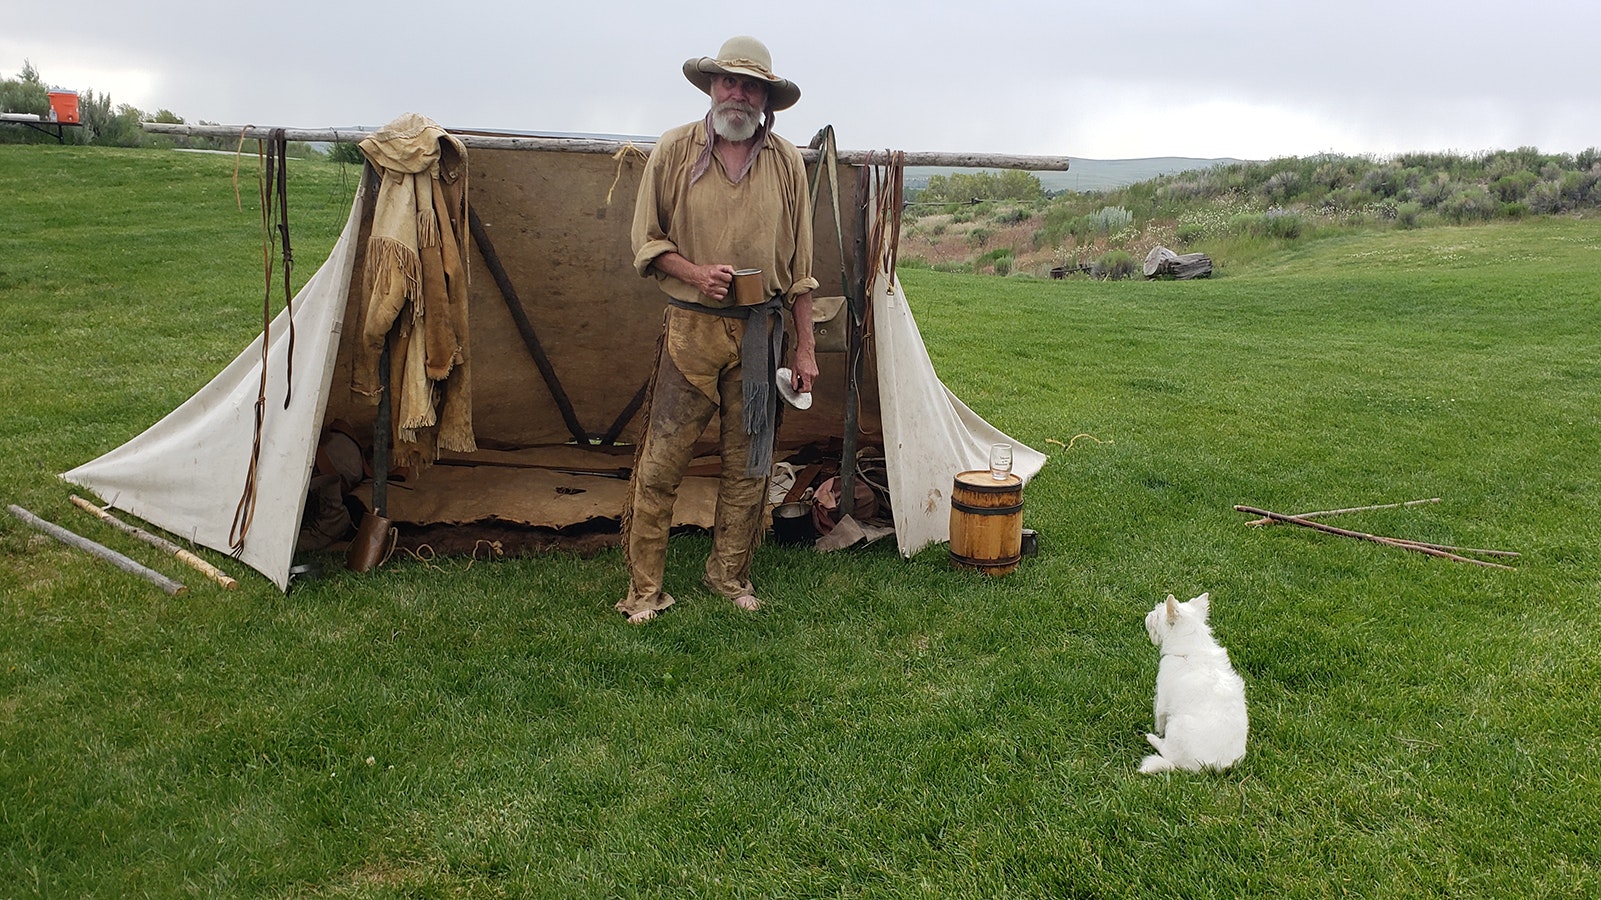 George Korhel dressed in buckskin clothing he made himself stands in front of his camp during the recent Green River Rendezvous.